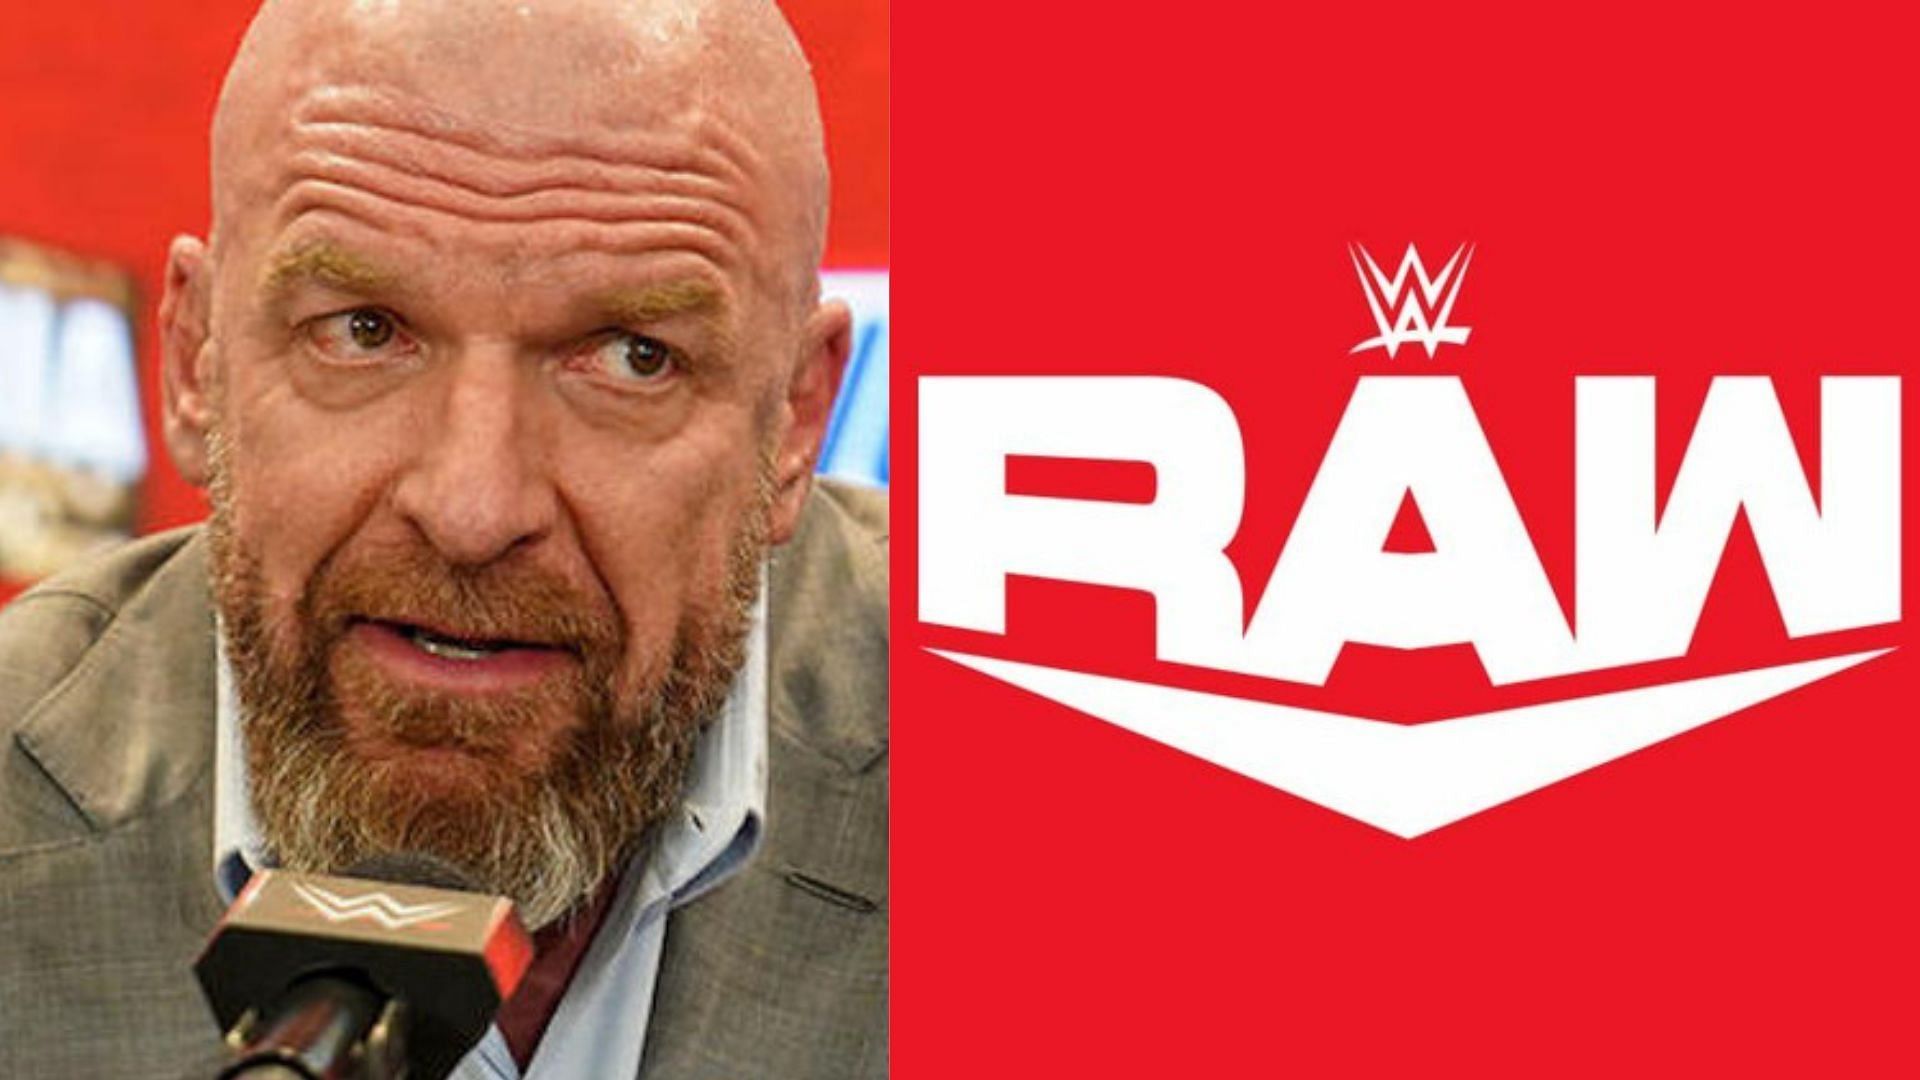 Triple H will reportedly make an announcement tonight on WWE RAW.